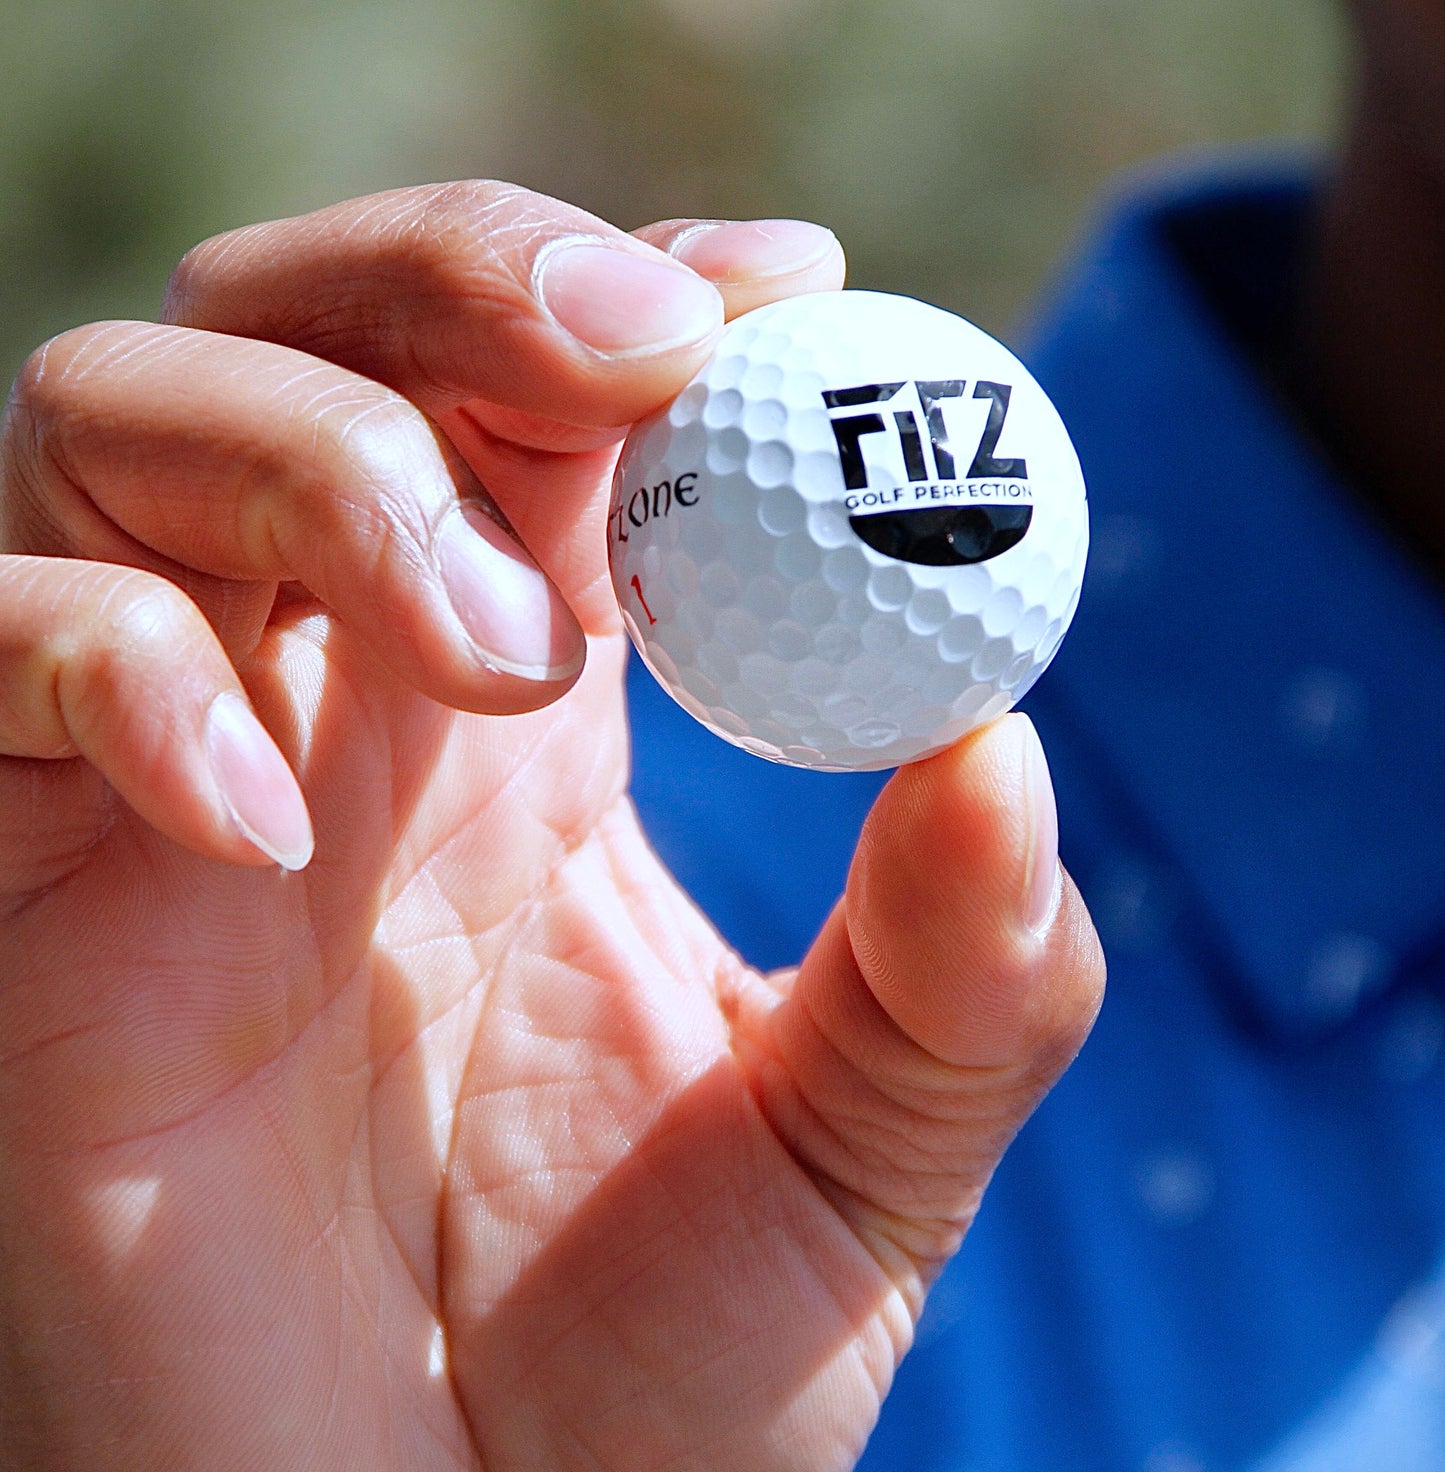 FitzOne Golf Perfection | Special Launch Edition Red Ball (Single Sleeve)